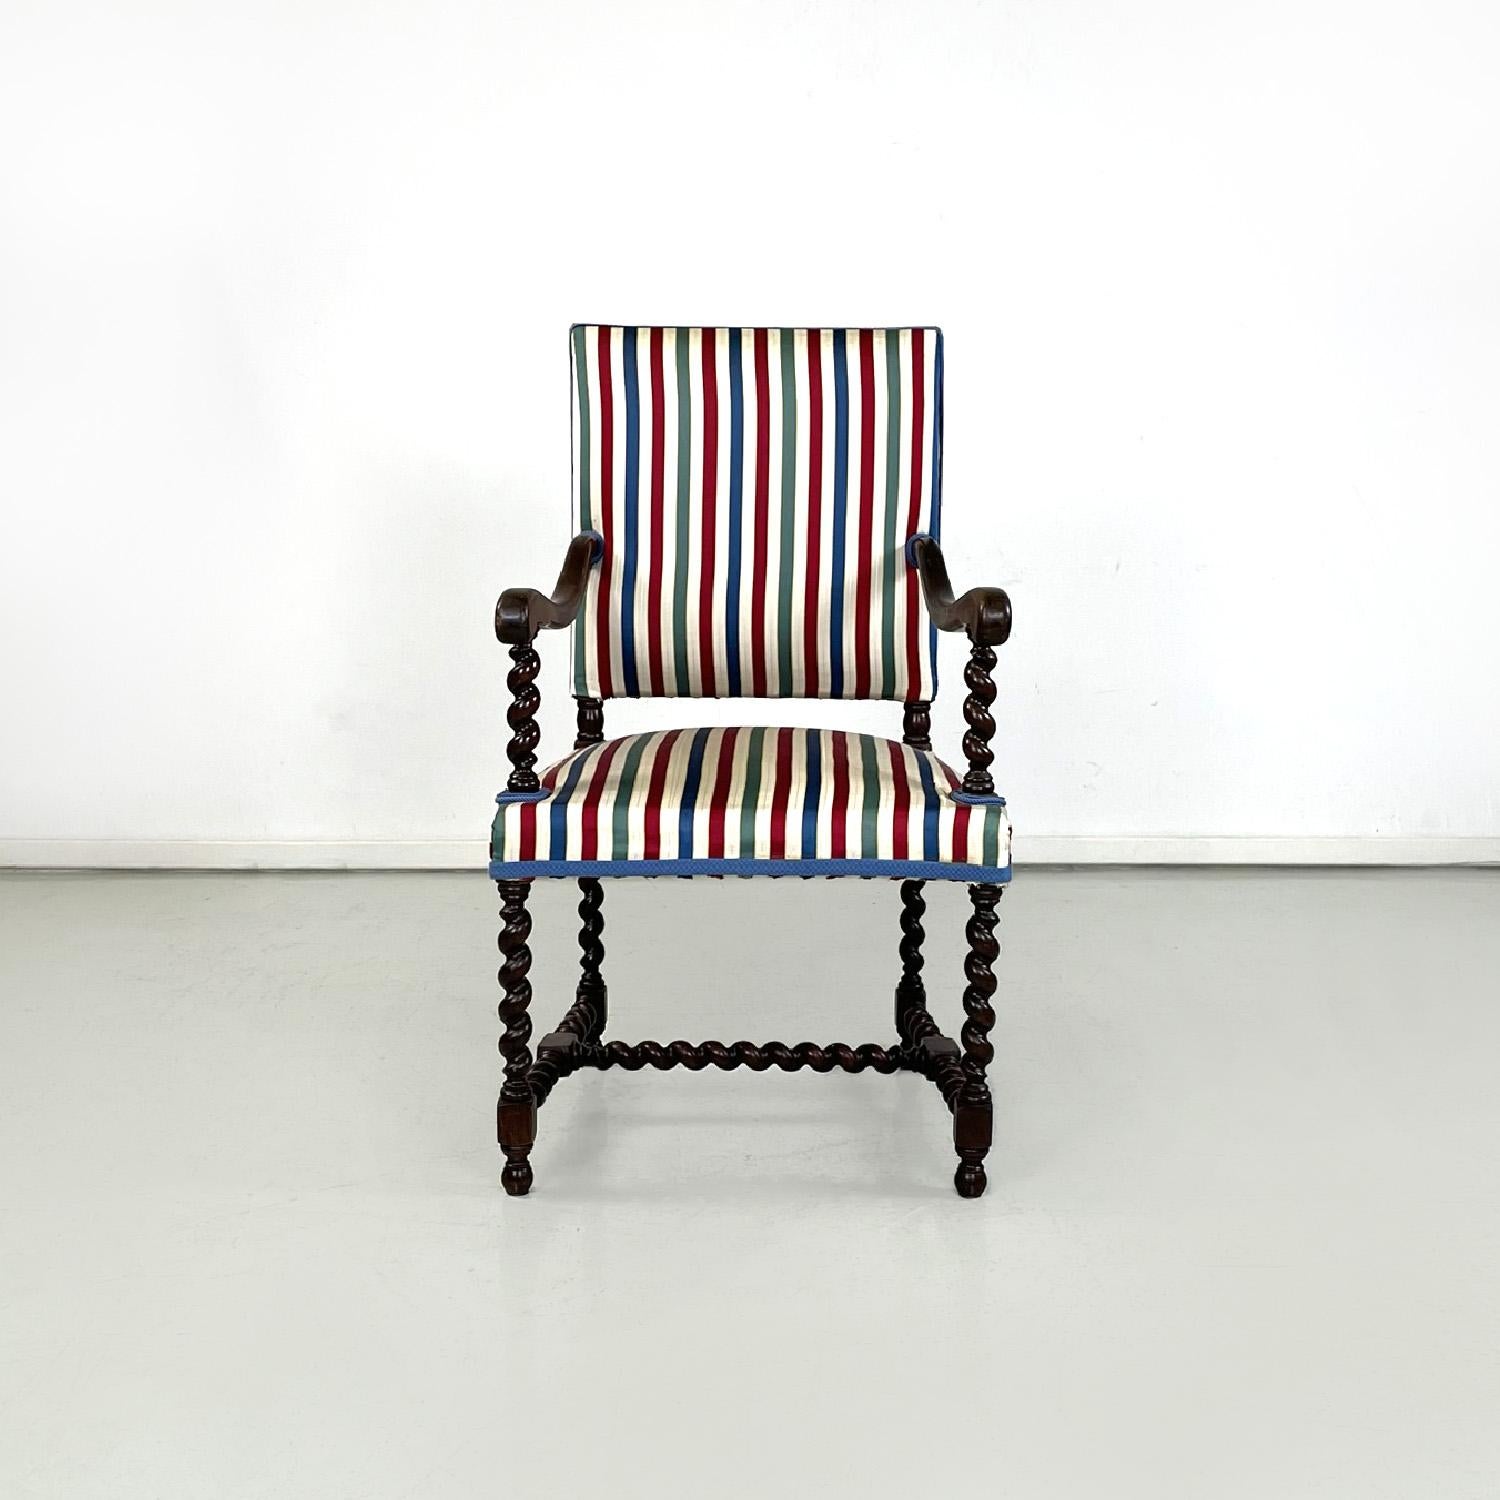 Italian wooden chair with armrests with colorful striped fabric, early 1900s
Armchair or high-back chair or table-head chair with armrests, with wooden structure. The seat and back are padded and covered in a silk-like fabric with white, red, blue